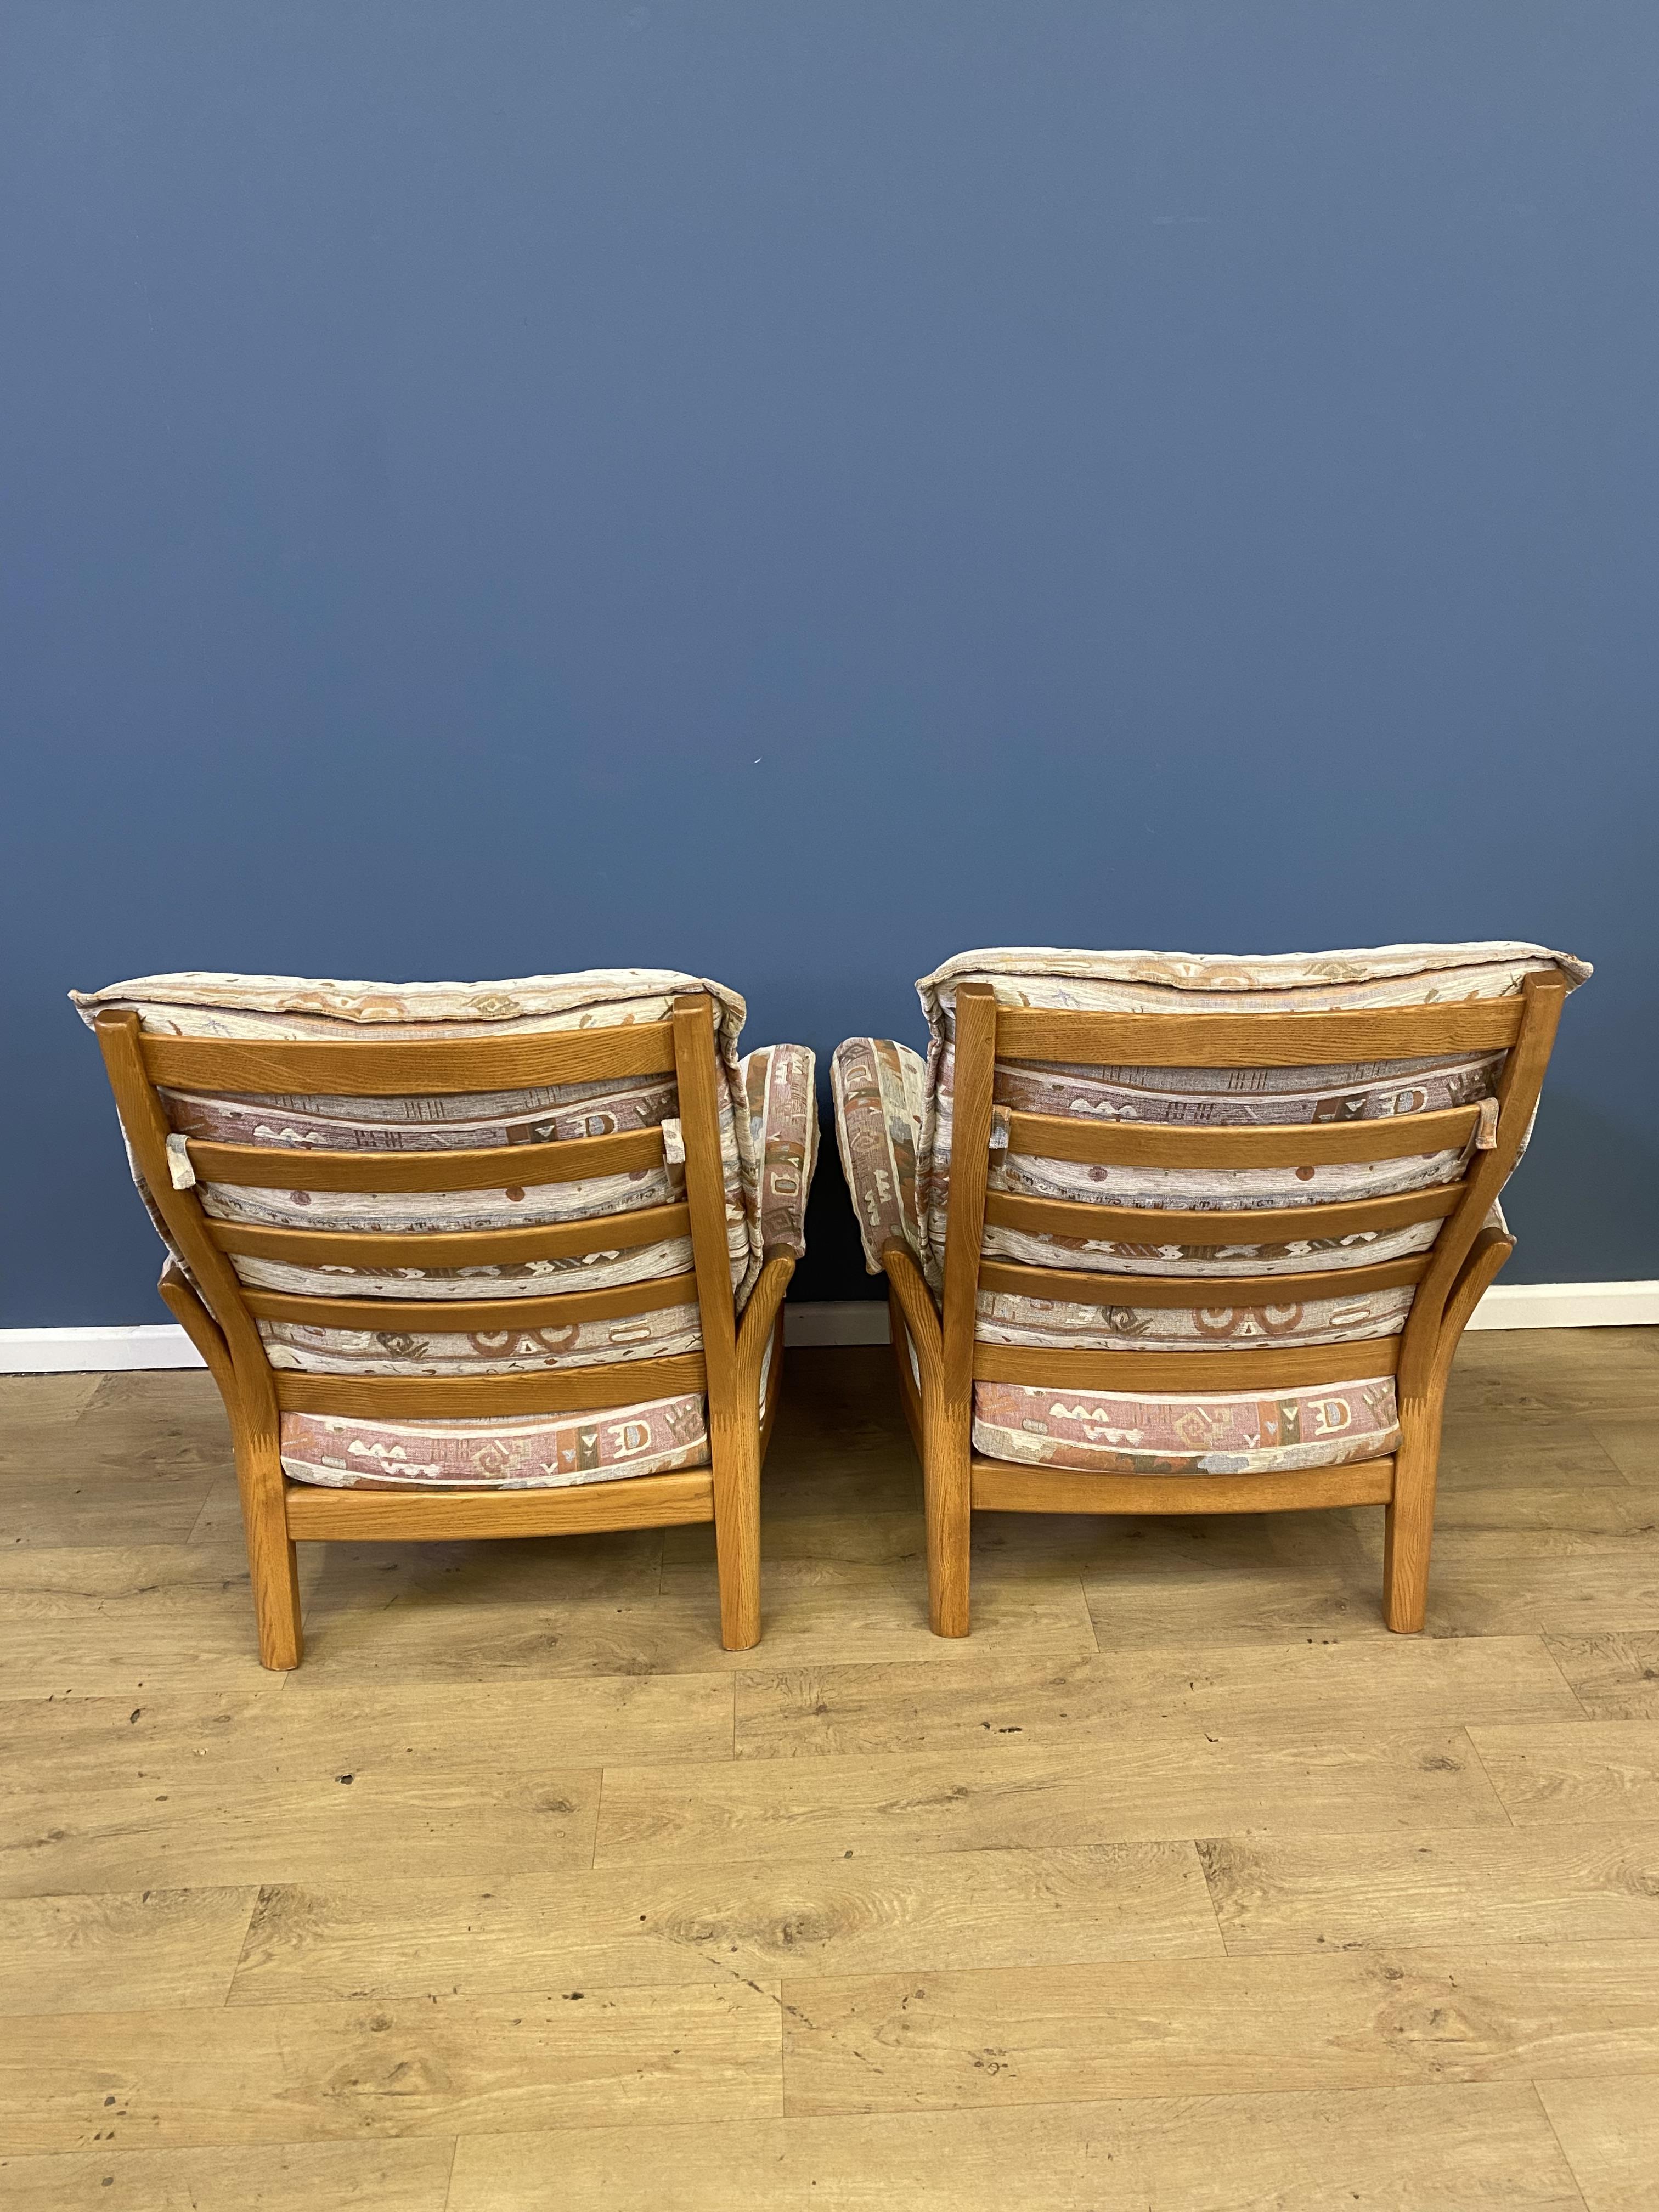 Pair of Ercol armchairs - Image 3 of 7